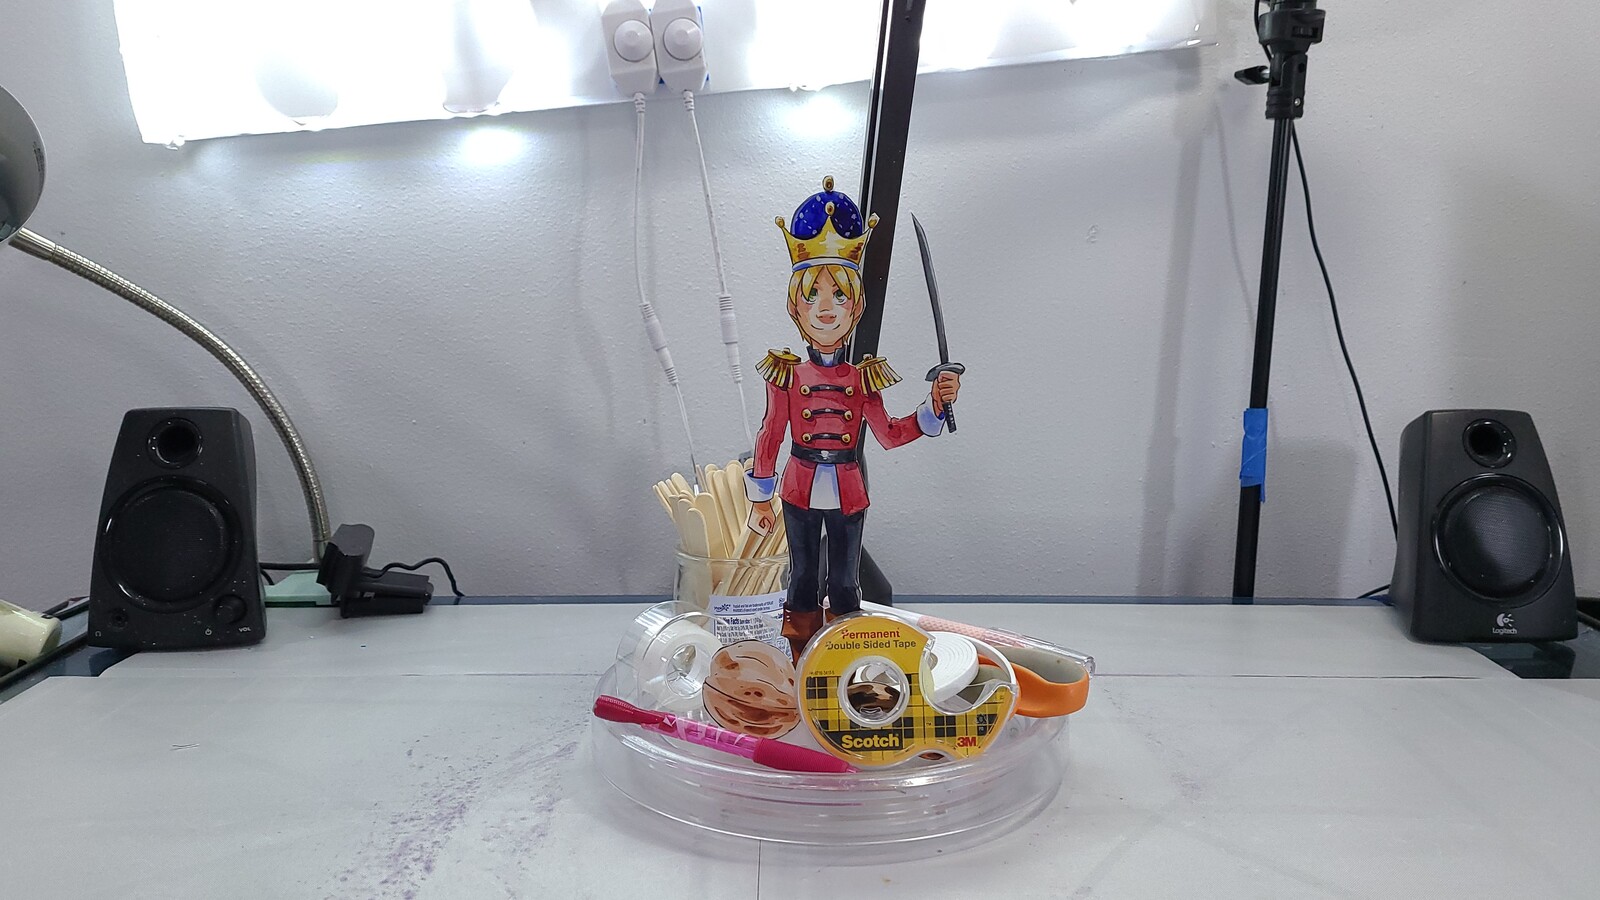 Papercraftmas Day 8: The Nutcracker Prince with assembly materials
